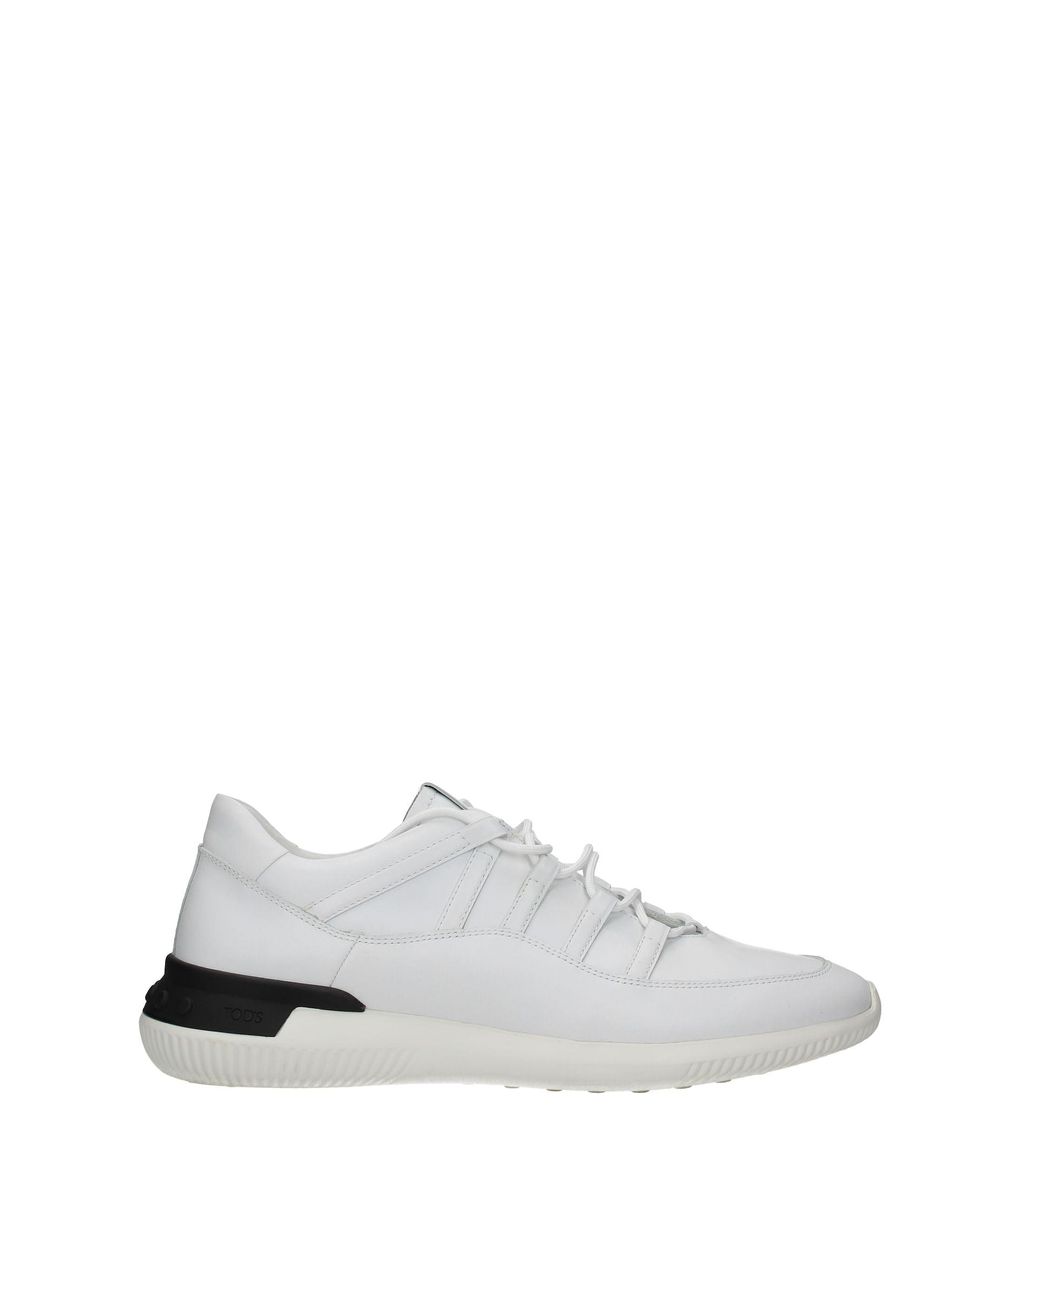 Tod's Sneakers Leather in White for Men - Lyst